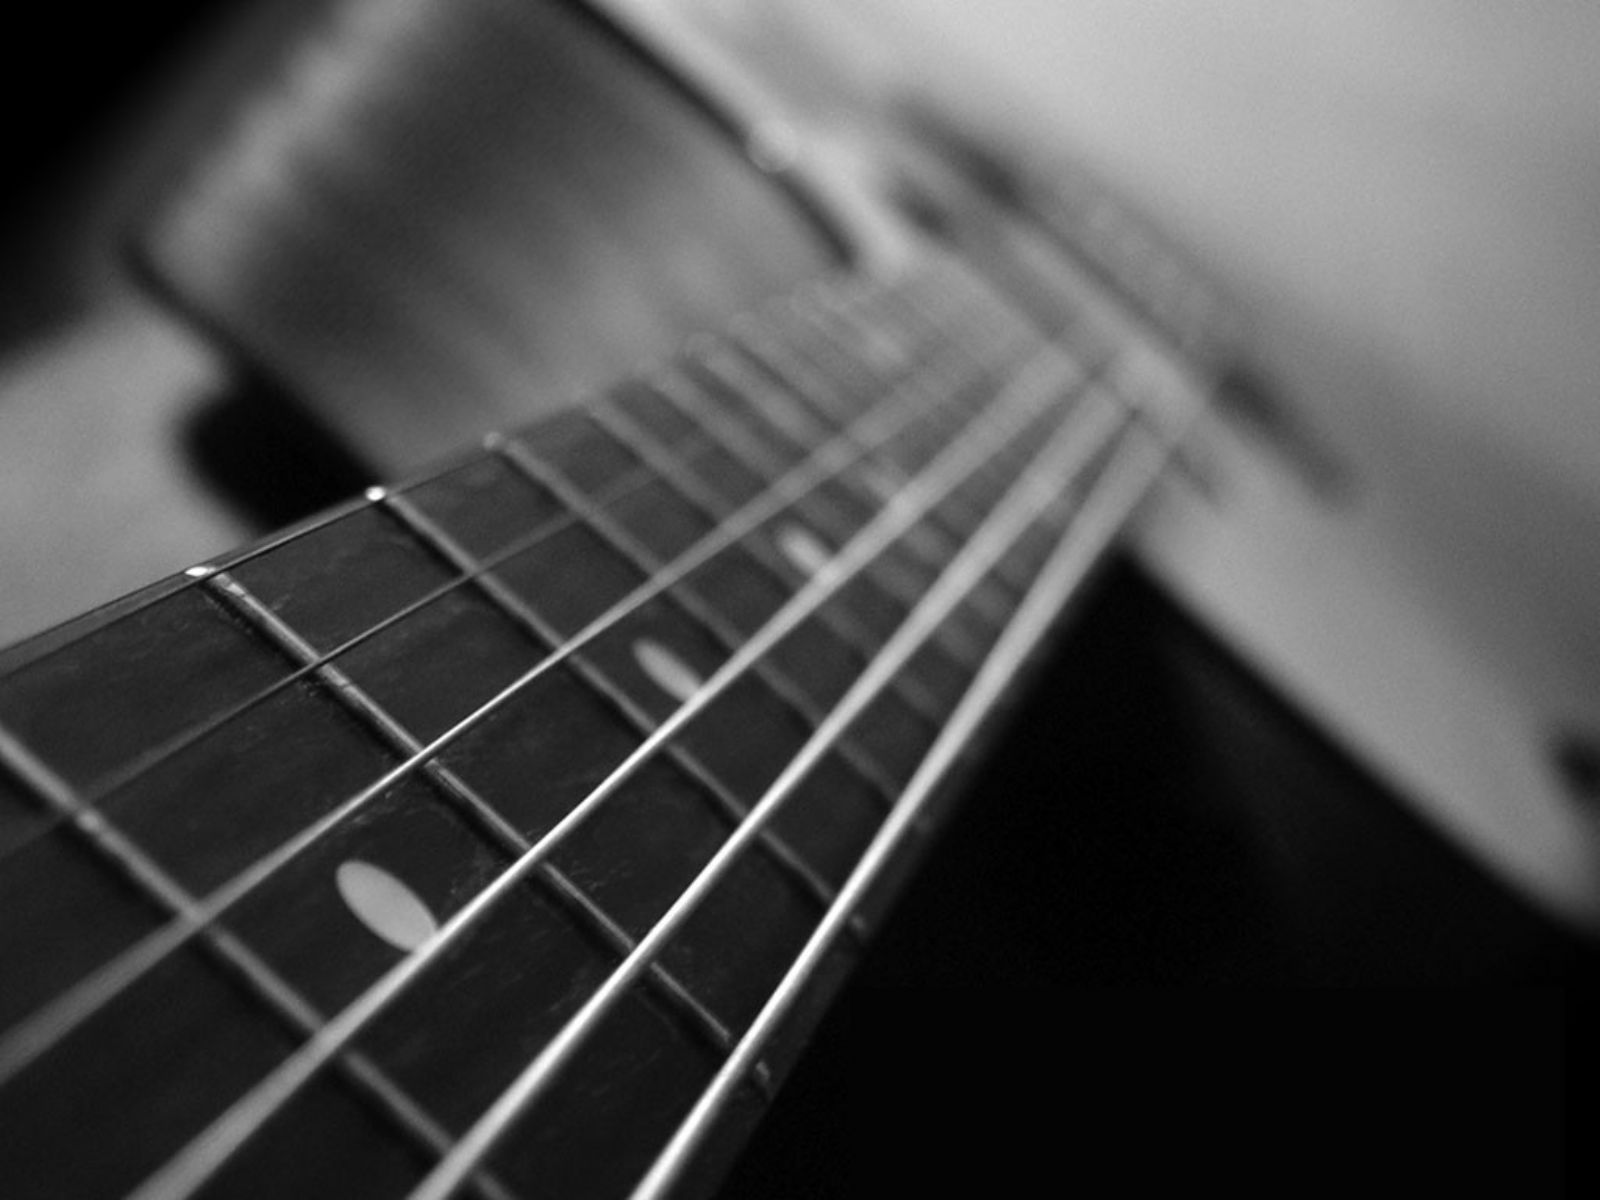 626 Guitar HD Wallpapers | Backgrounds - Wallpaper Abyss - Page 2